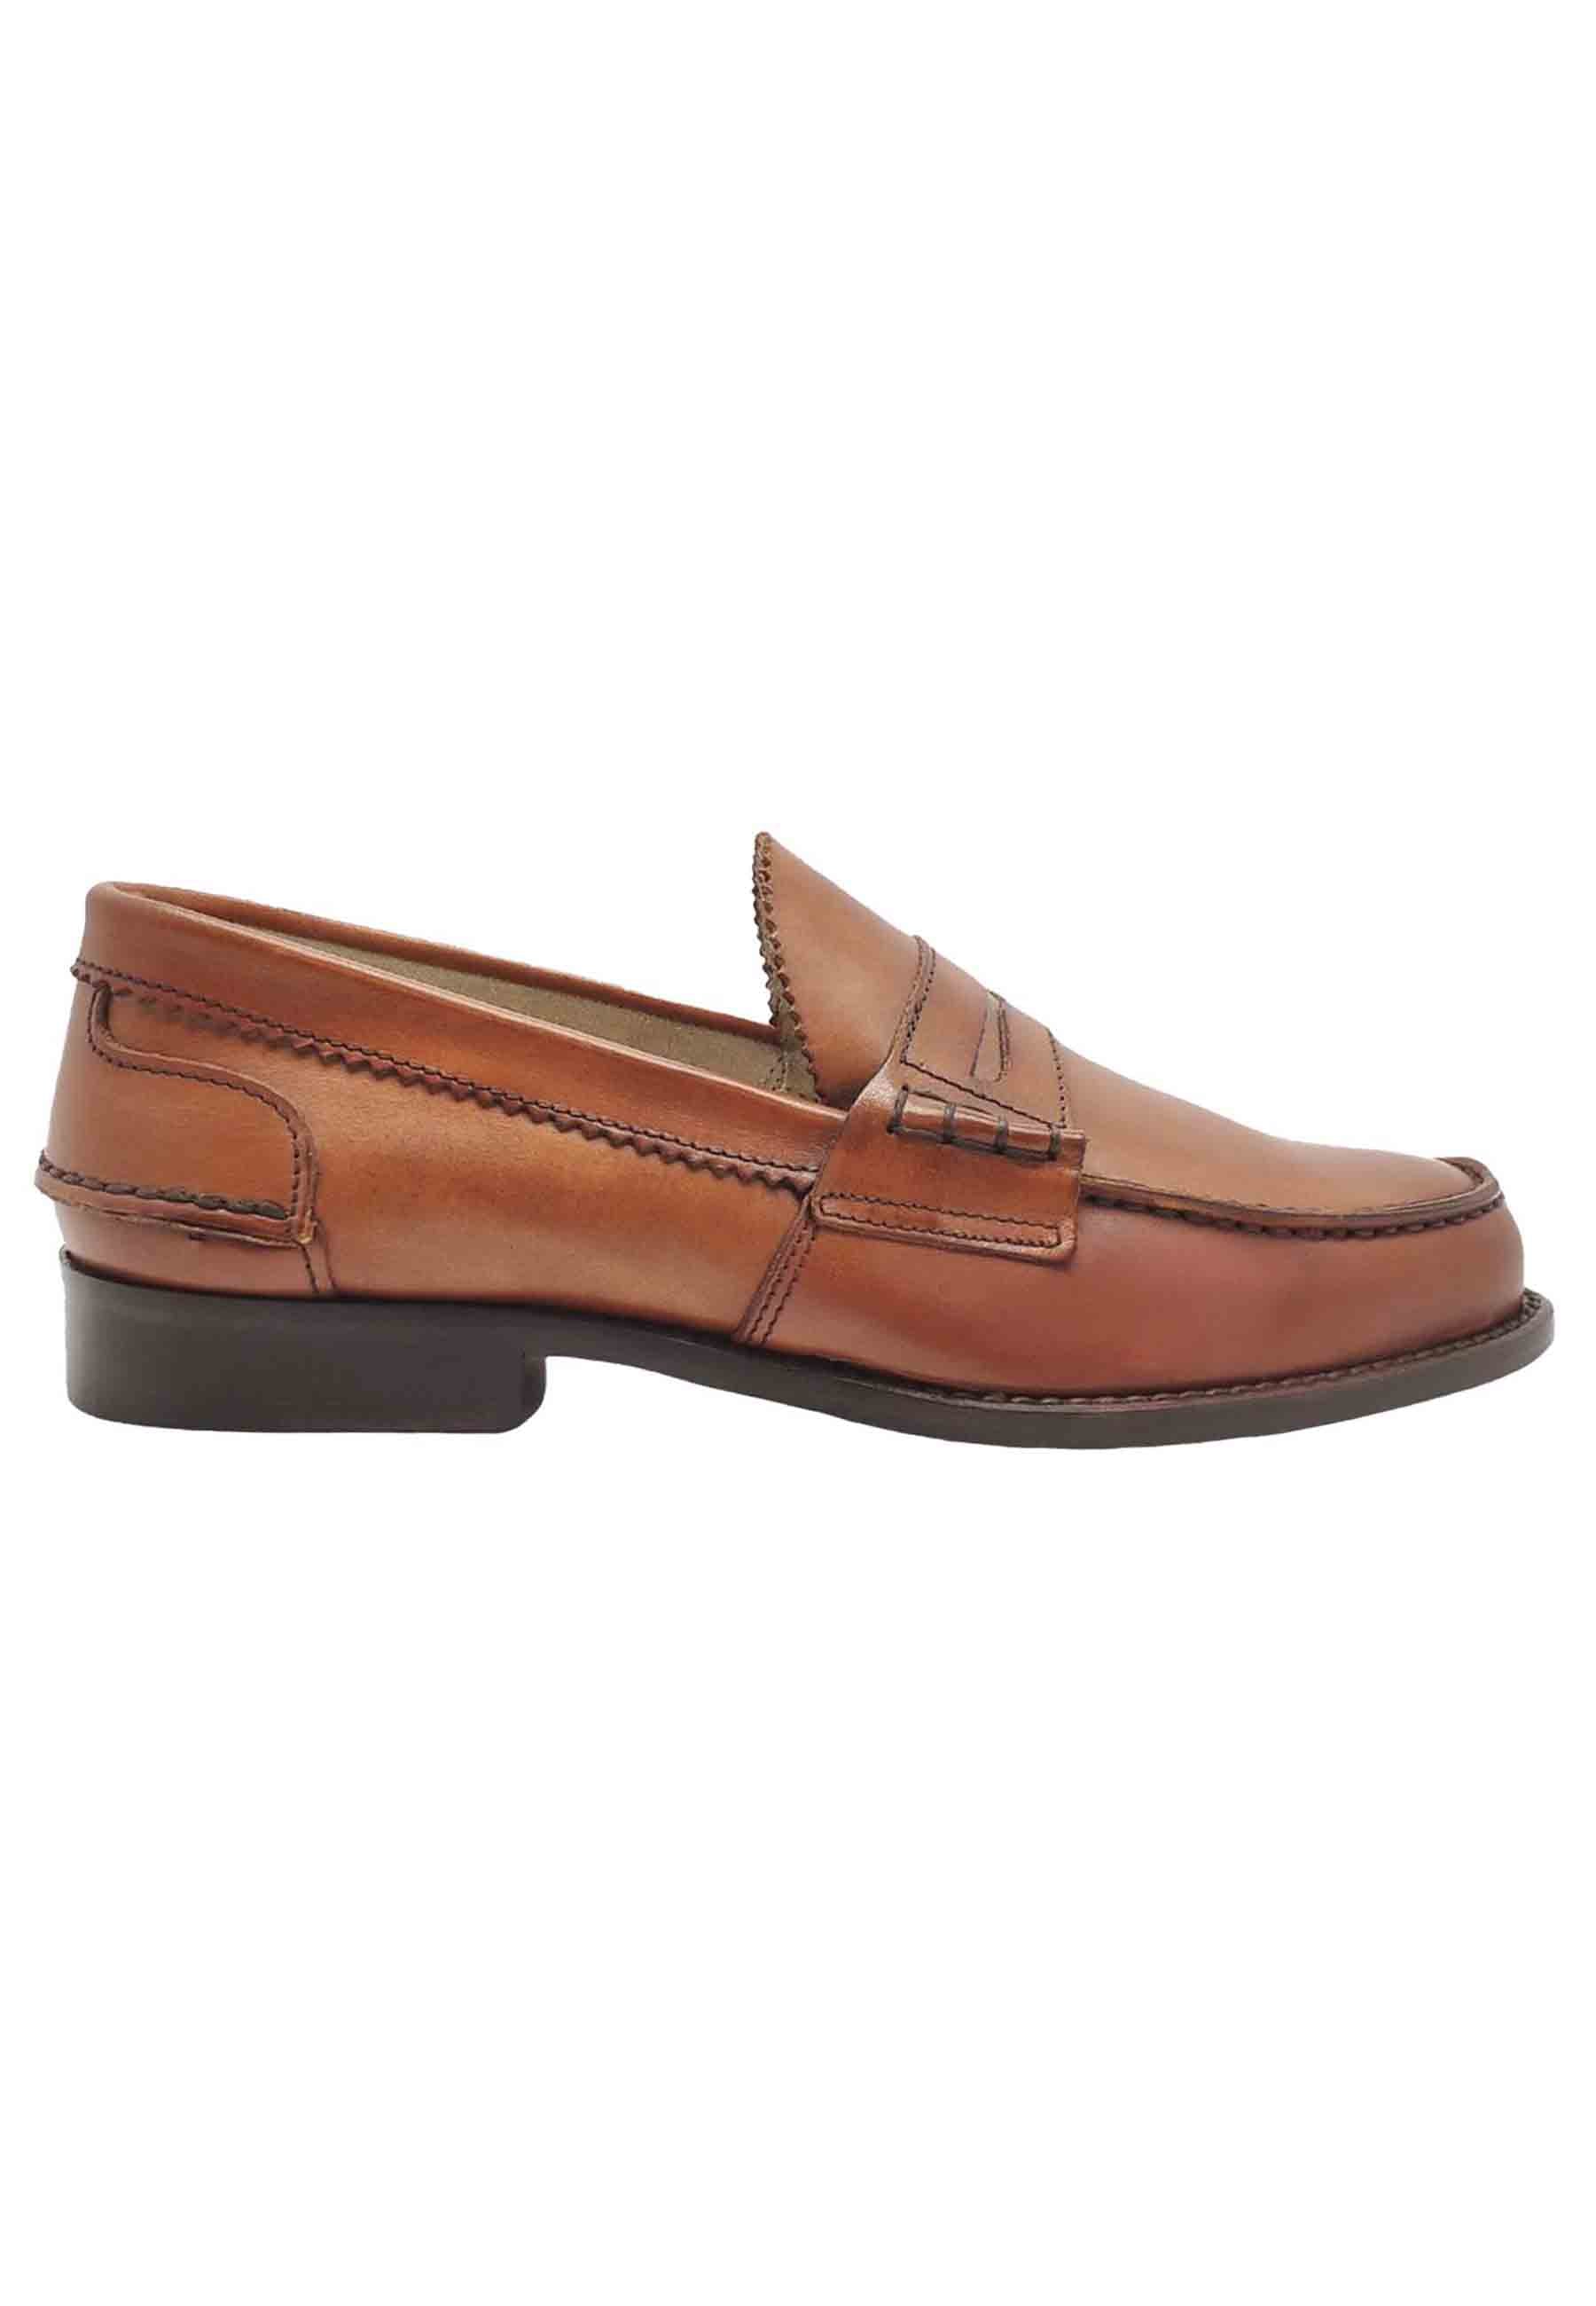 Men's moccasins in tan leather and leather sole